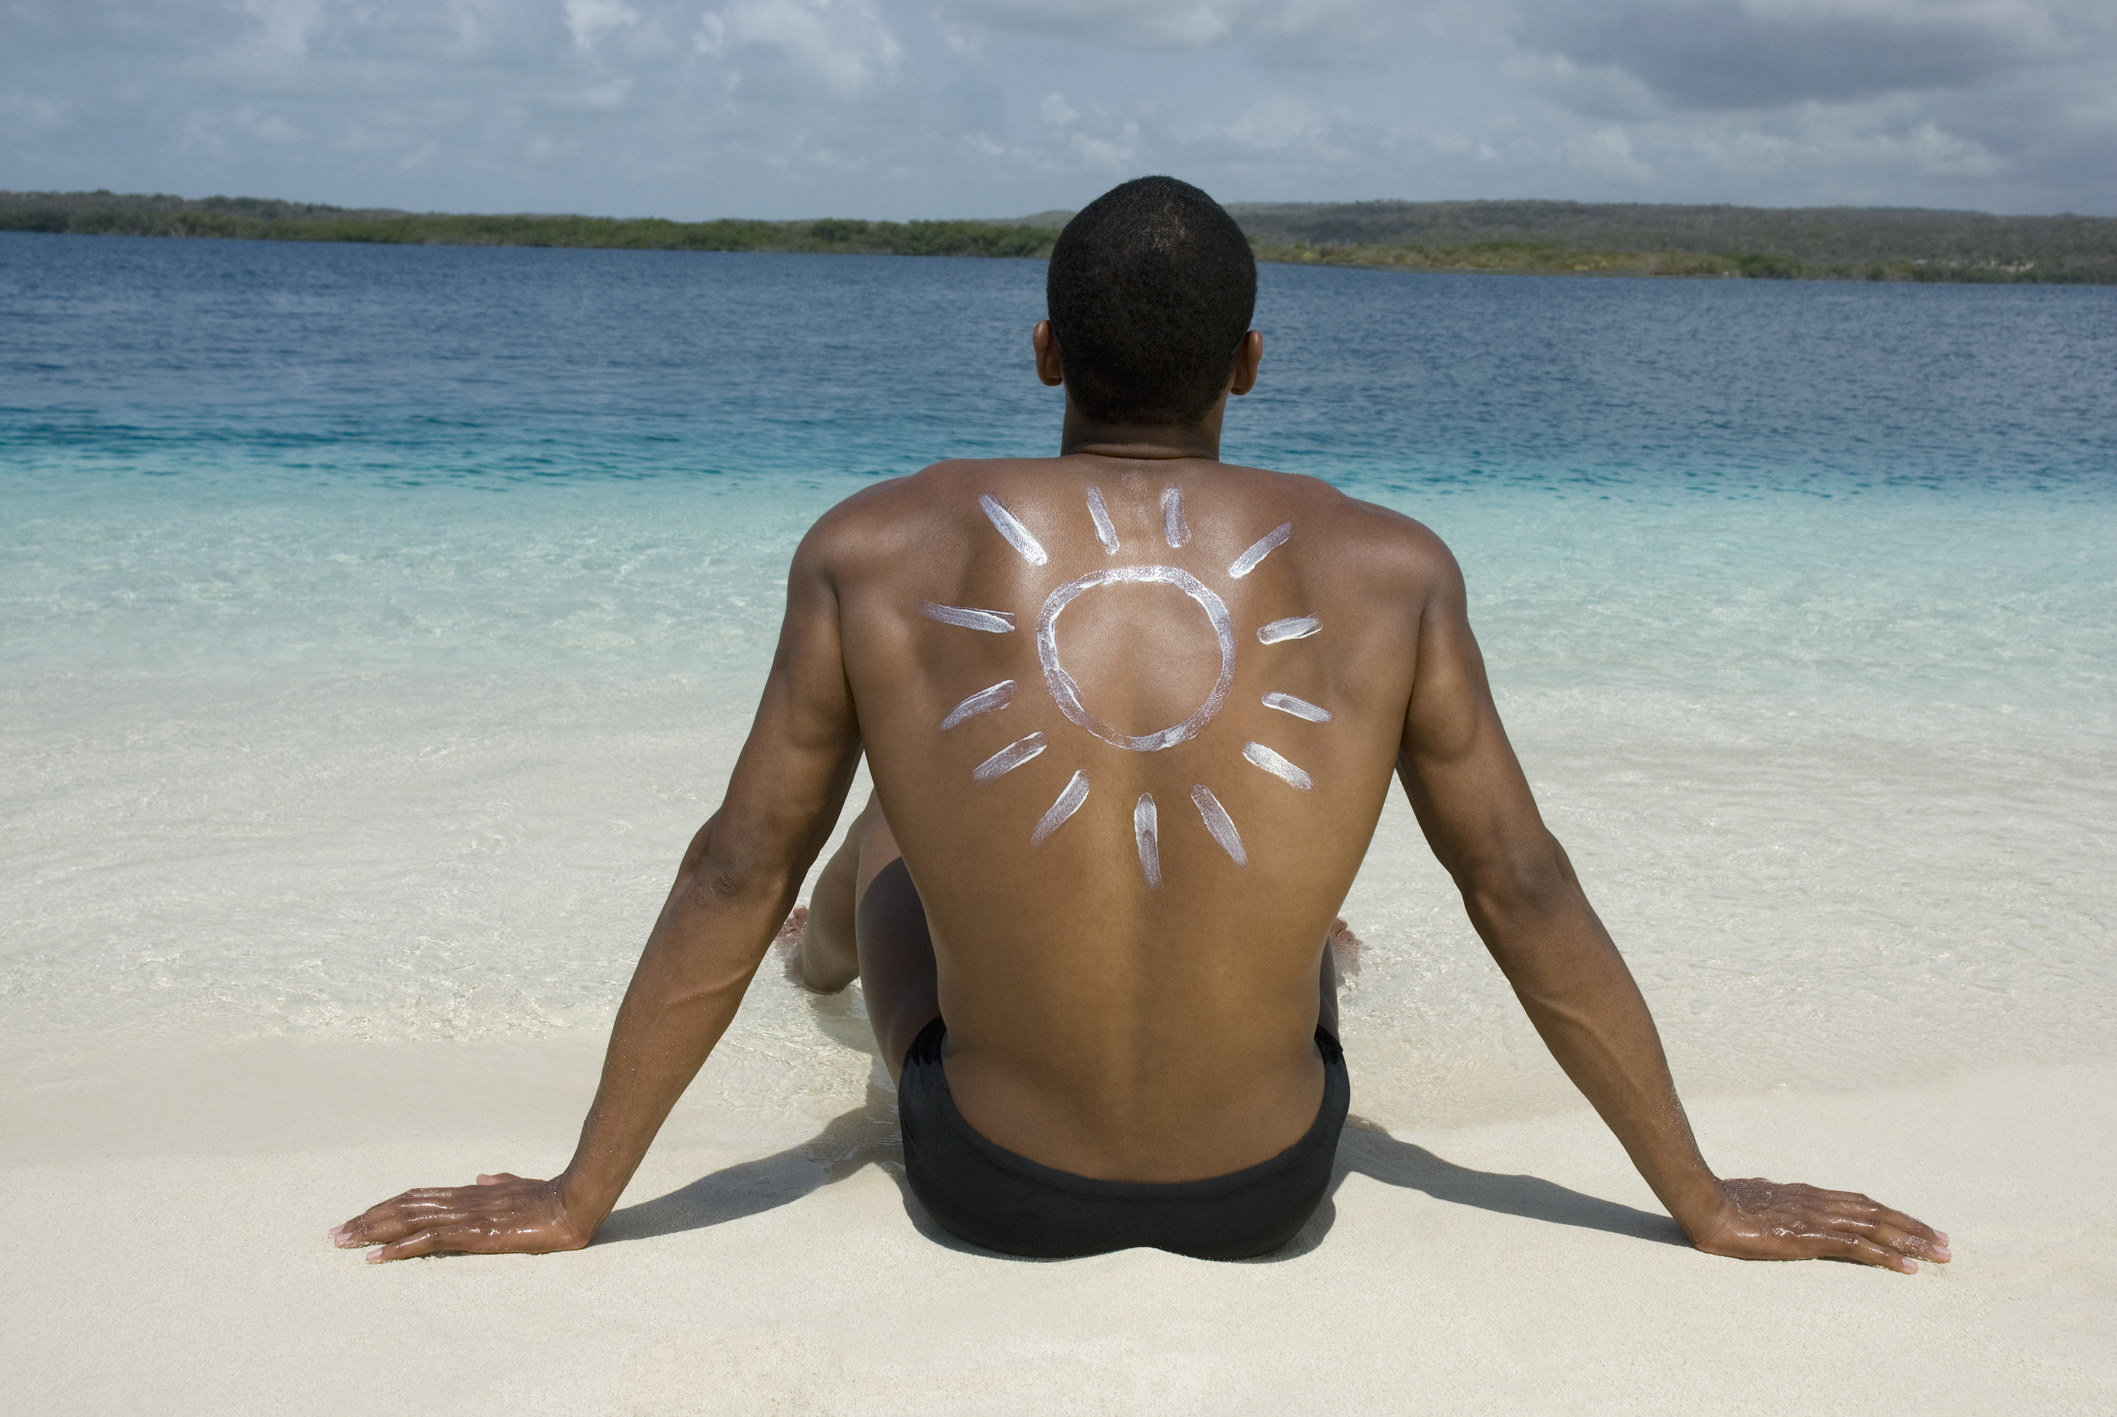 A guy sitting on the beach with a picture of the sun painted on his back with sunscreen